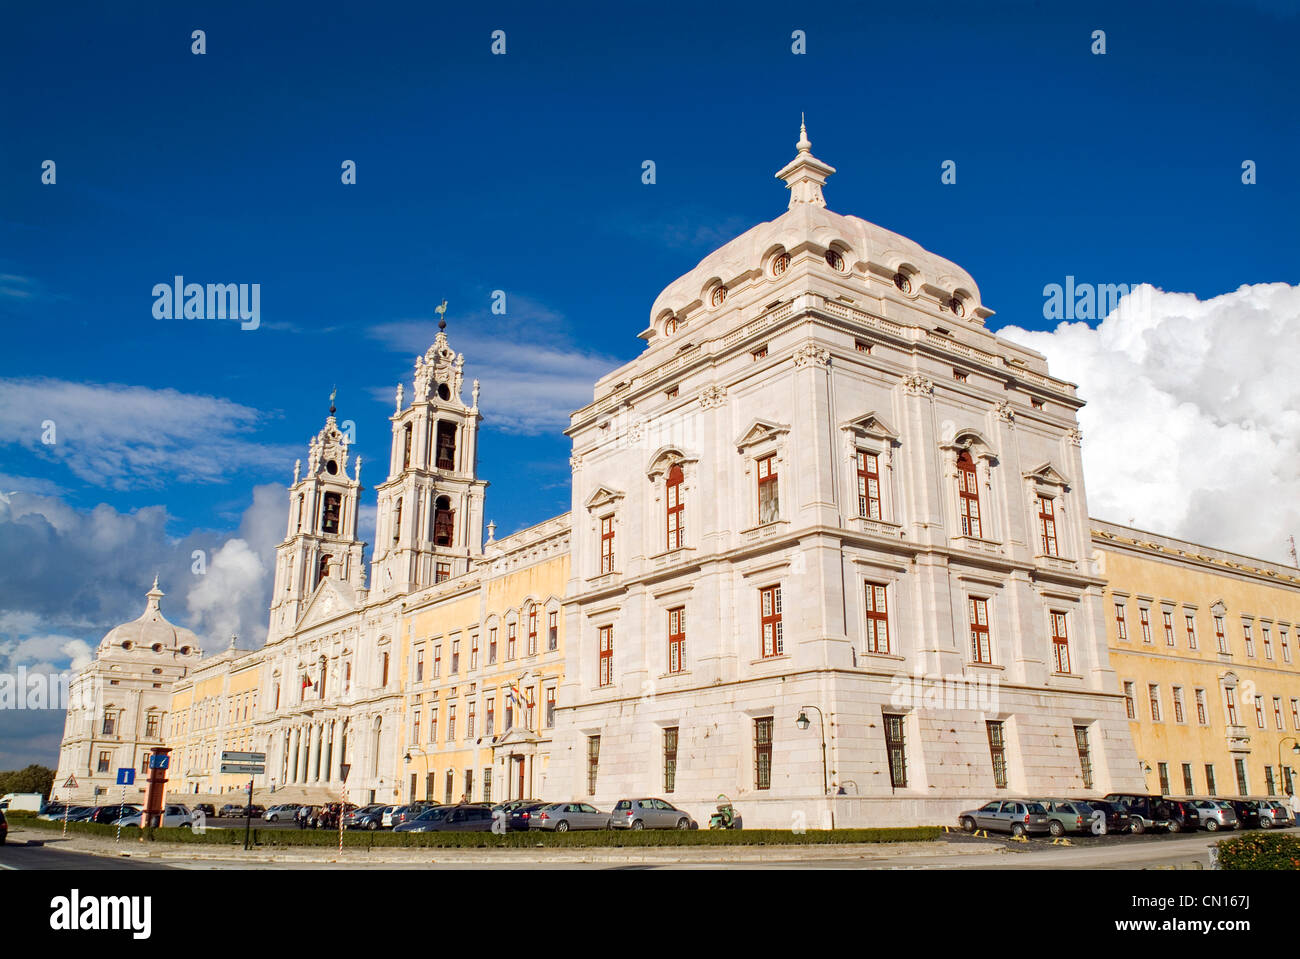 Convent of Mafra, Mafra National Palace and Convent in Portugal. Belonged to the Franciscan order. Baroque building. Stock Photo